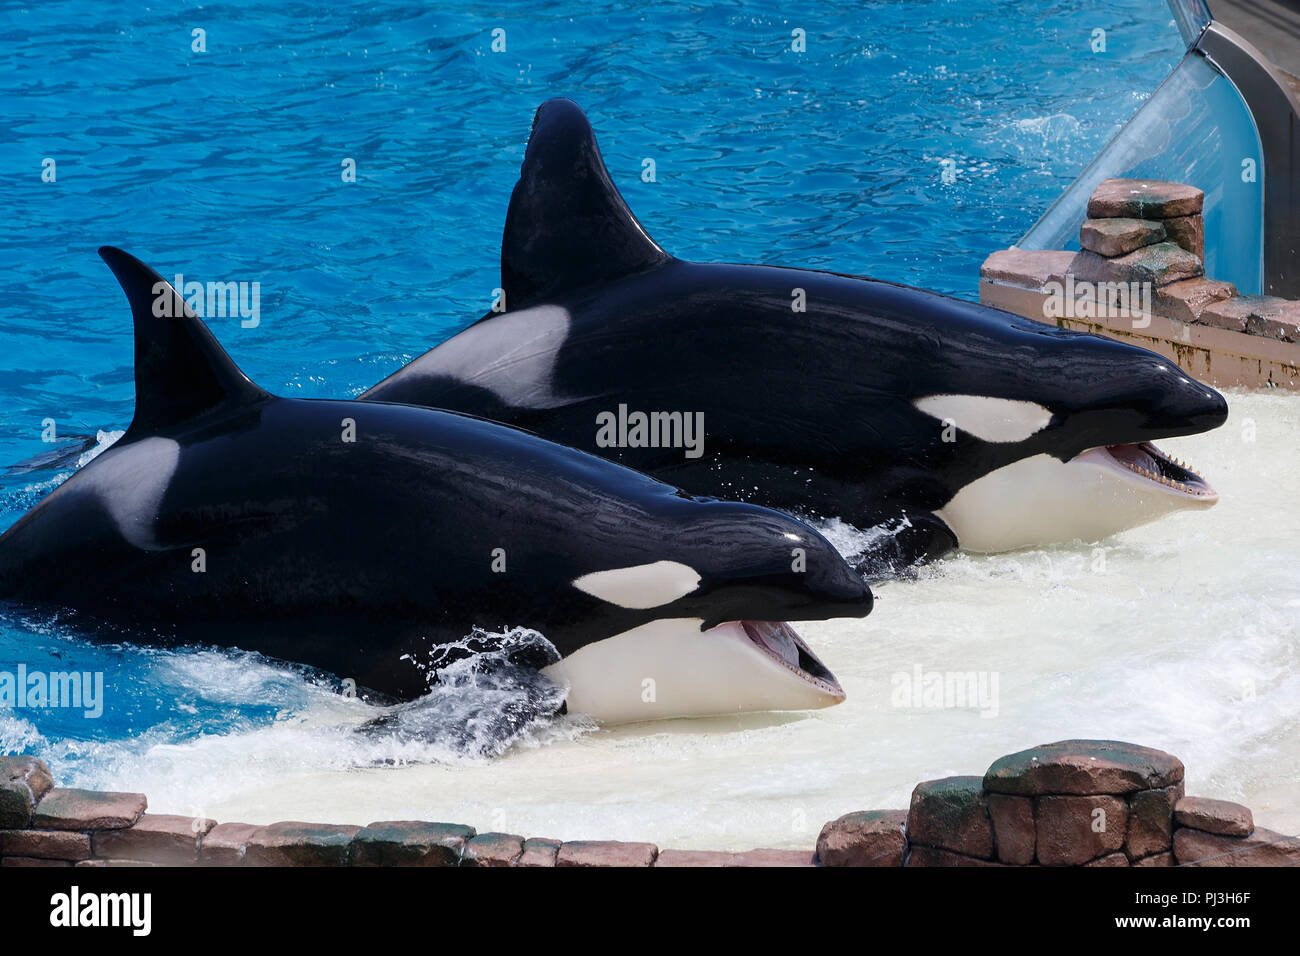 A pair of Killer Whales (Orcinus orca) performs during a show at Sea World, San Diego, California, United States of America Stock Photo